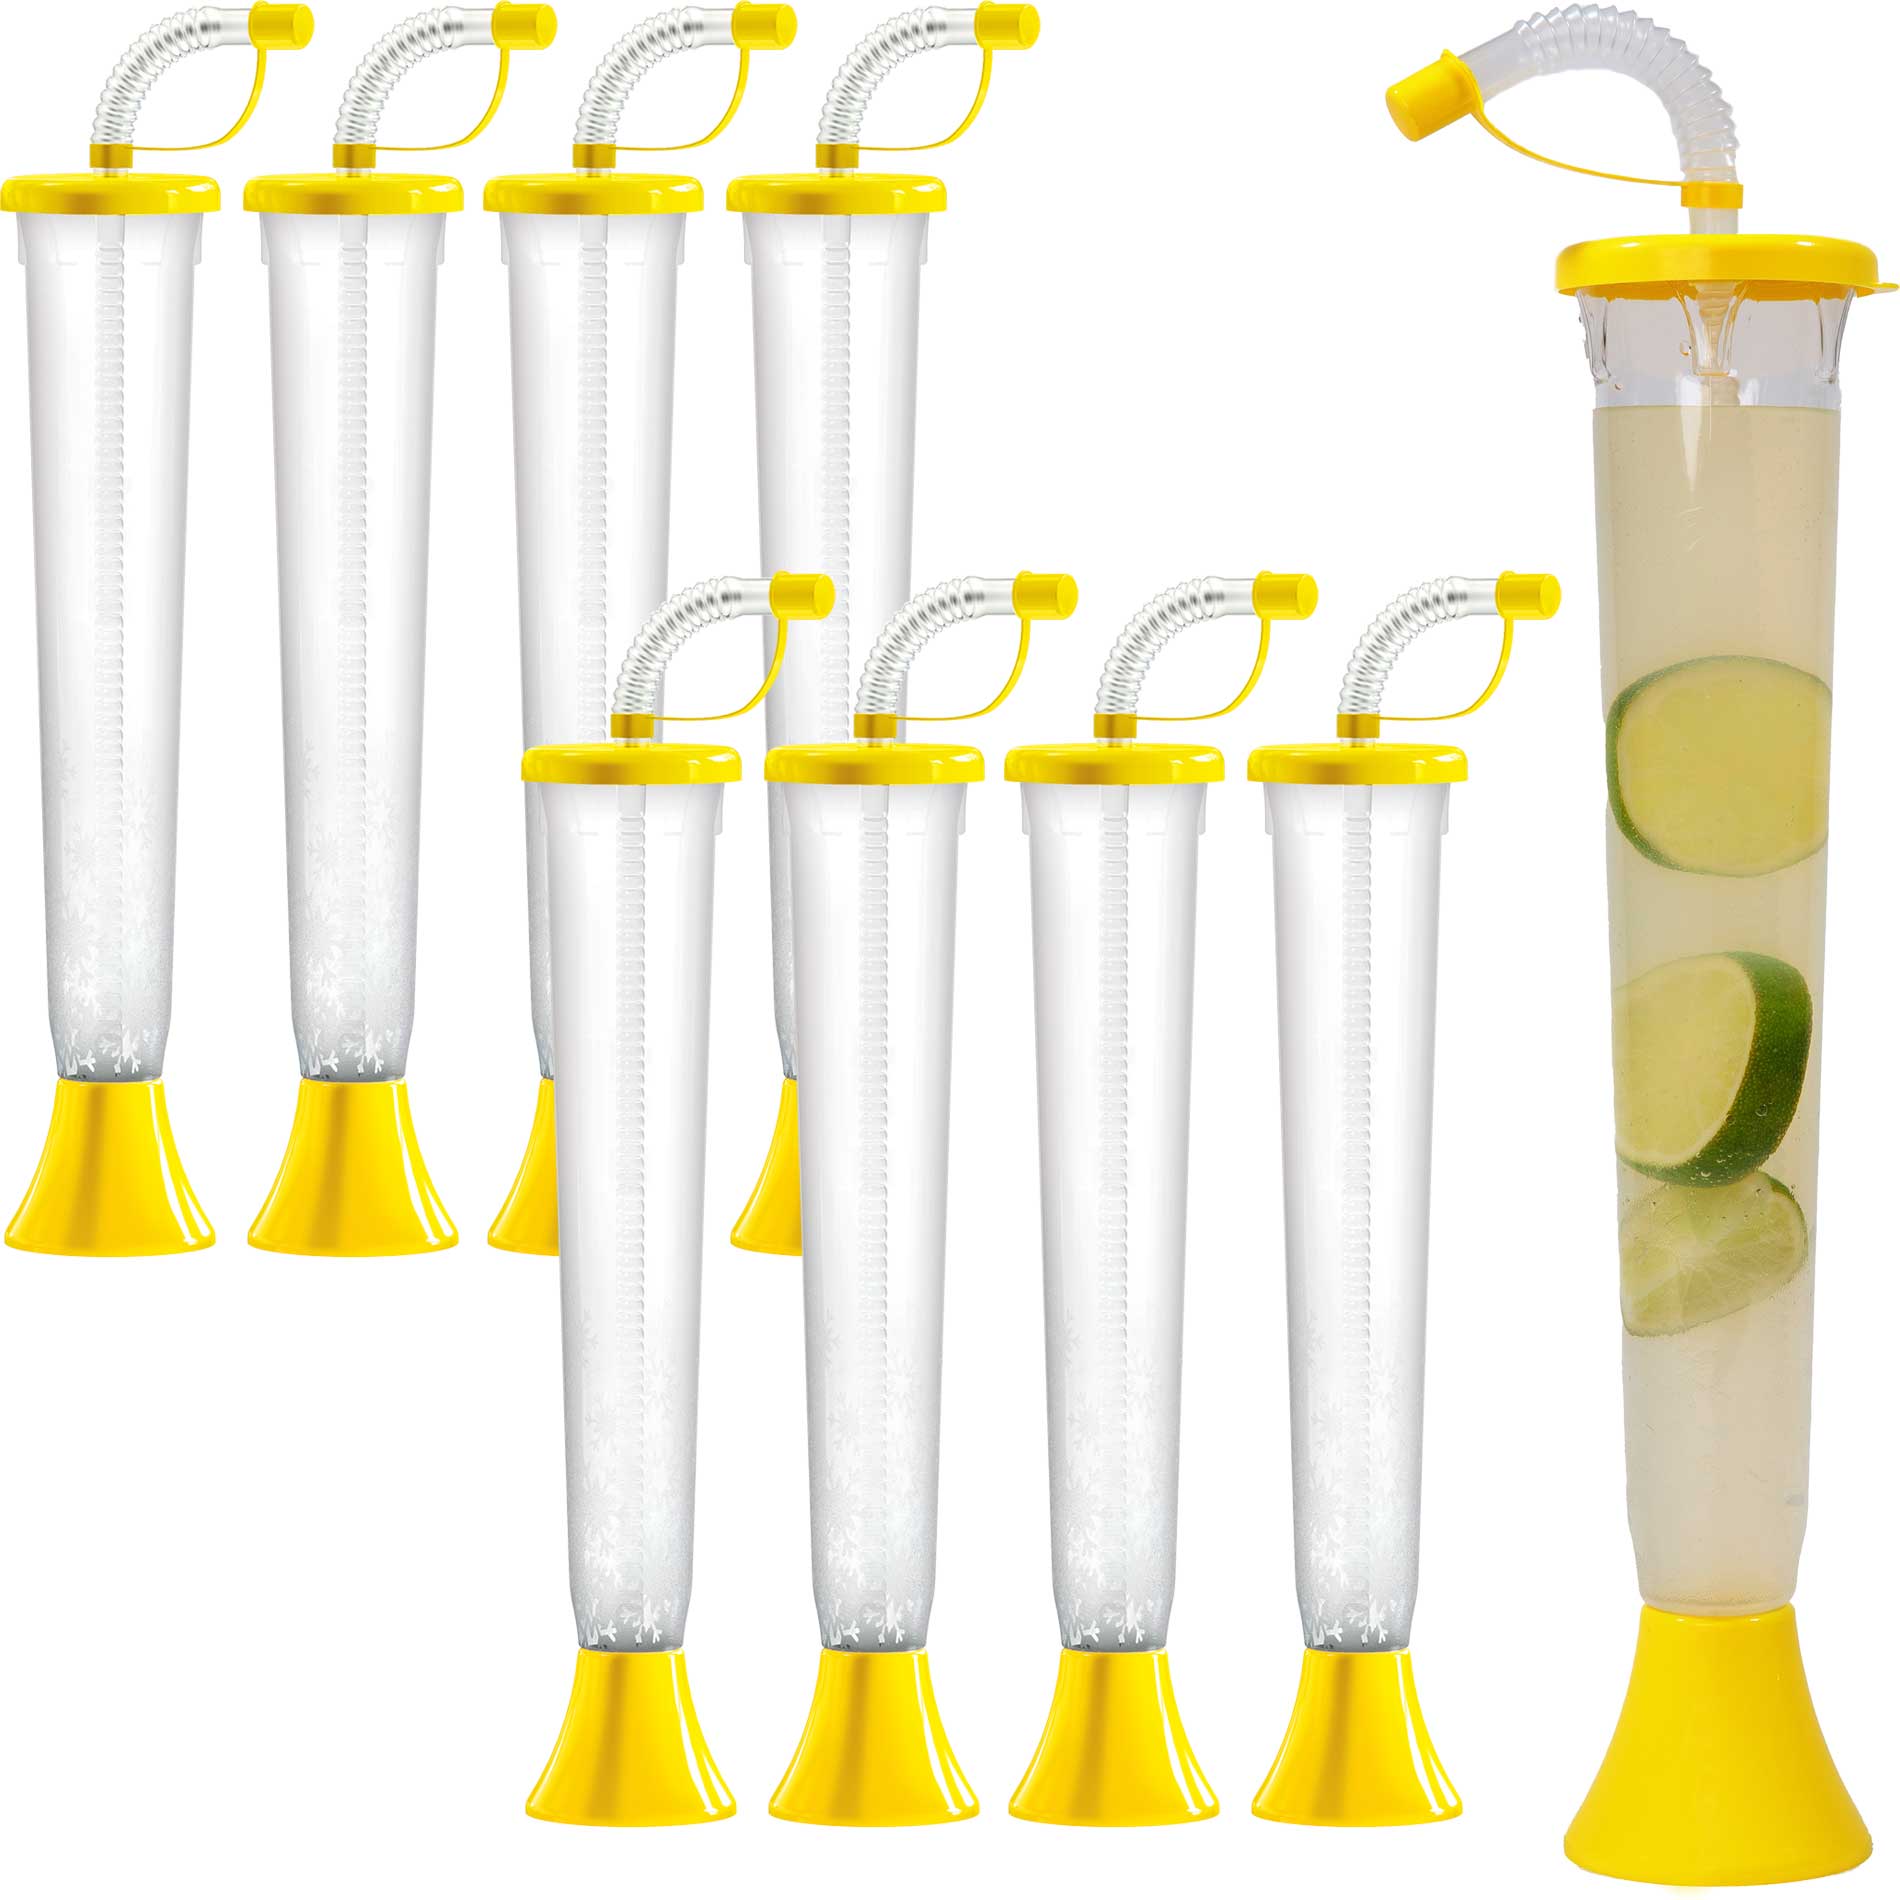 (54 or 108 Cups) Yard Cups with Yellow Lids and Straws - 14oz - for Margaritas, Cold Drinks, Frozen Drinks, Kids Party